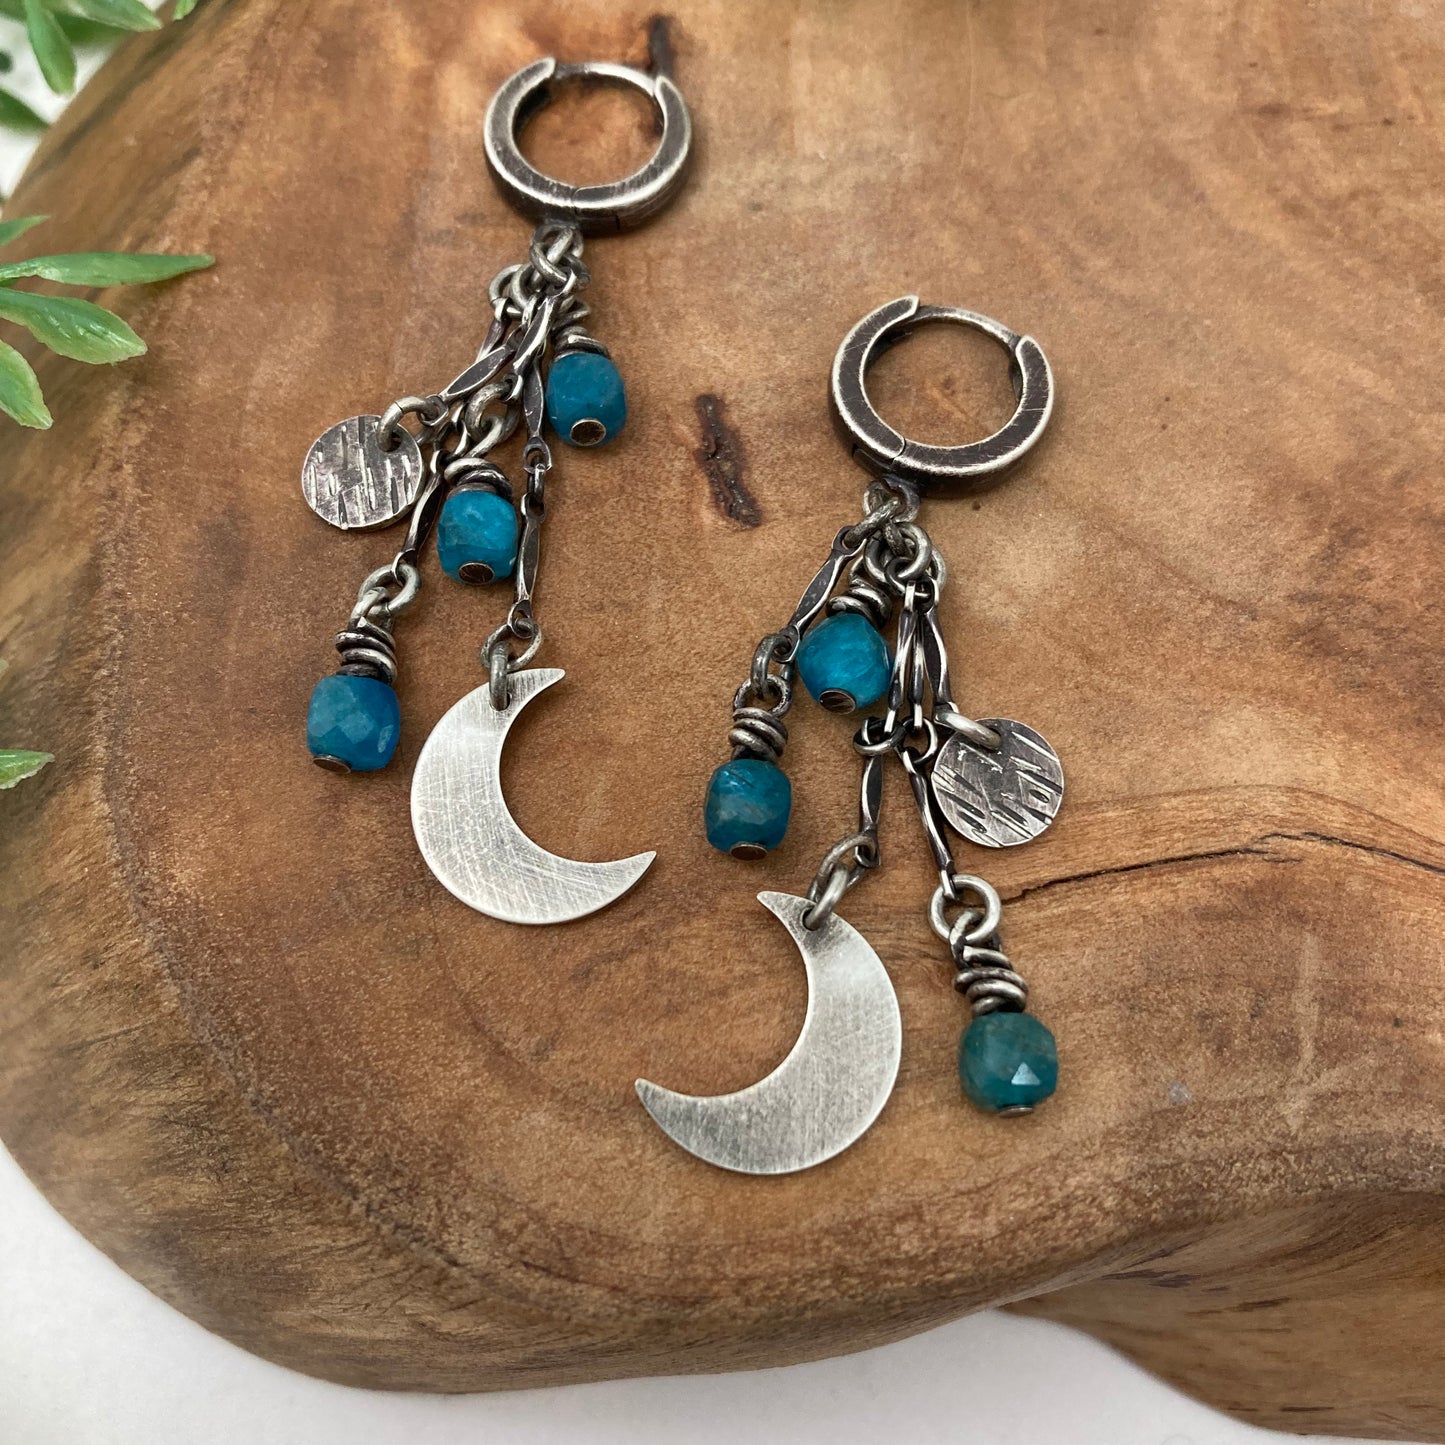 Crescent Moon Hoop Earrings with Blue Apatite Beads